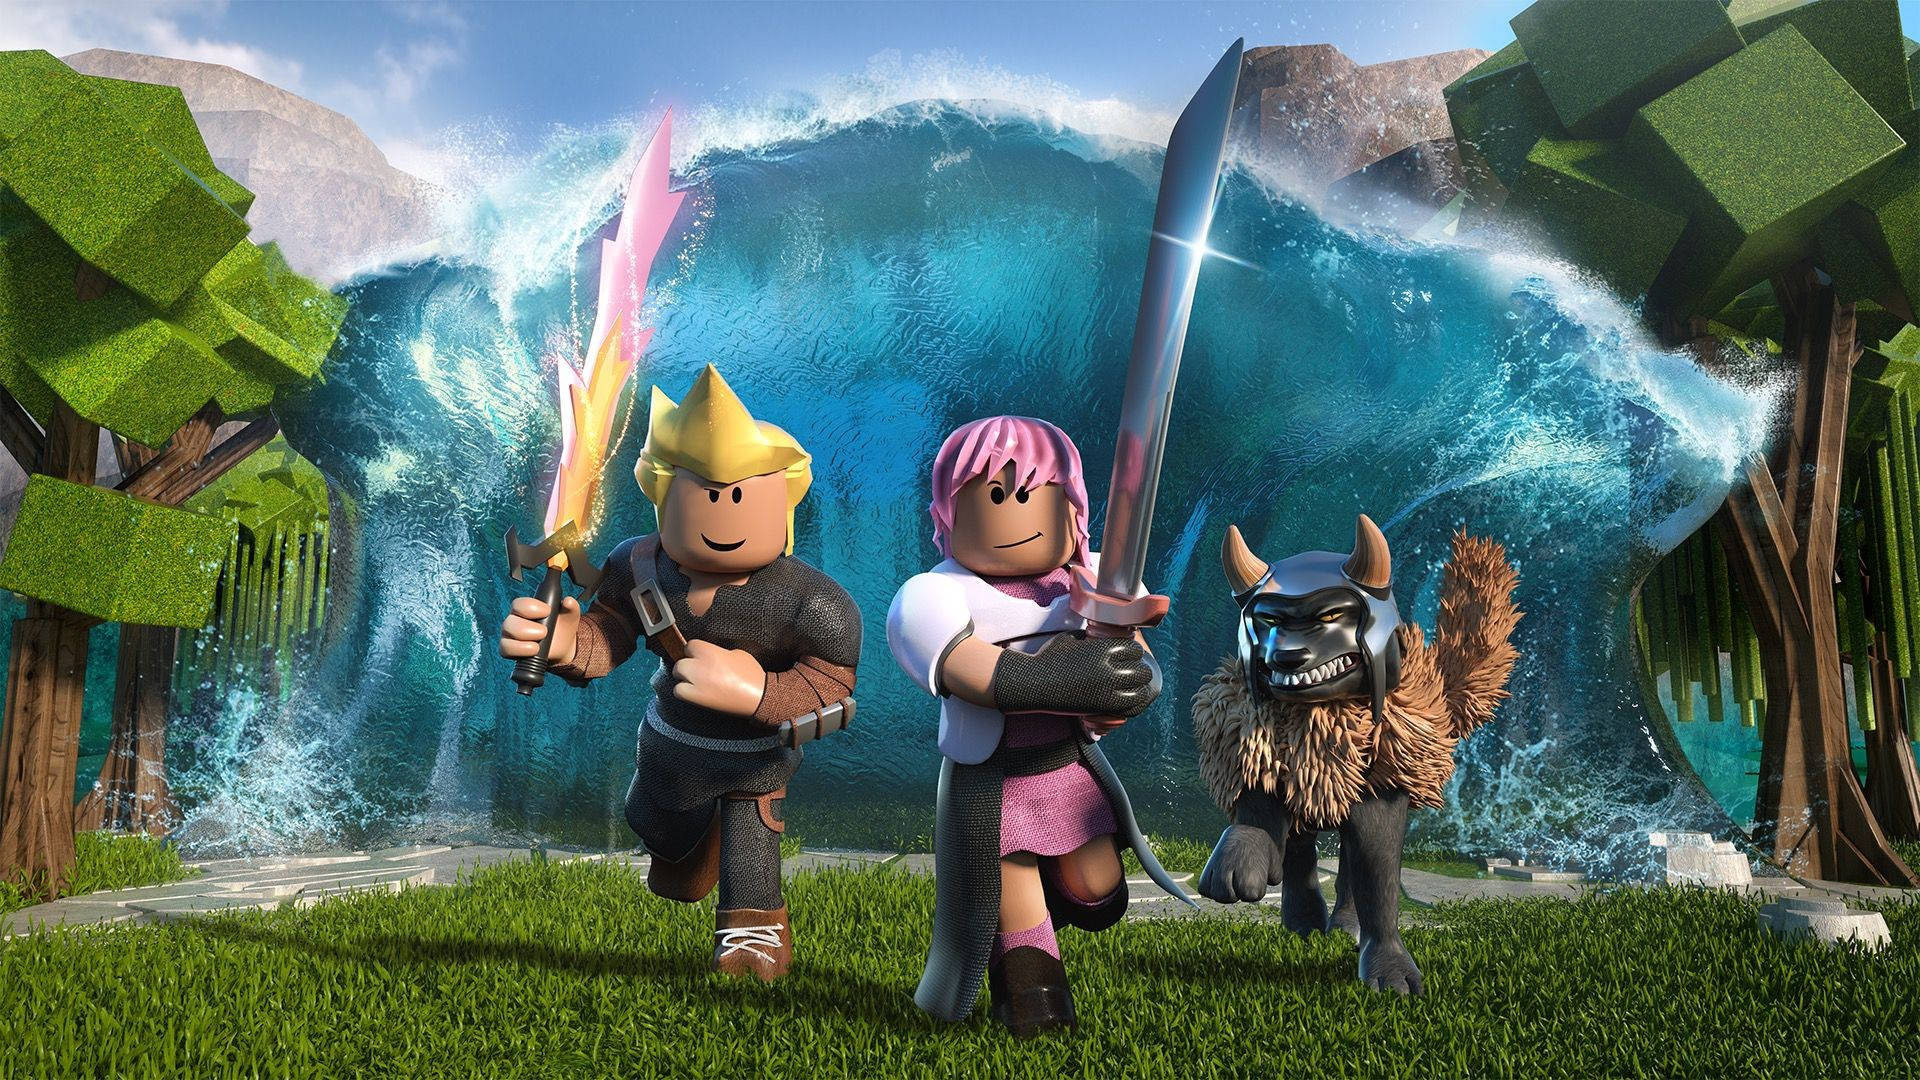 Free Roblox Avatar Wallpaper 2024: Looking for the perfect background for your Roblox avatar? Look no further than our collection of Free Roblox Avatar Wallpapers for 2024! With over 200 options to choose from, you\'re sure to find the perfect fit for your personal style.